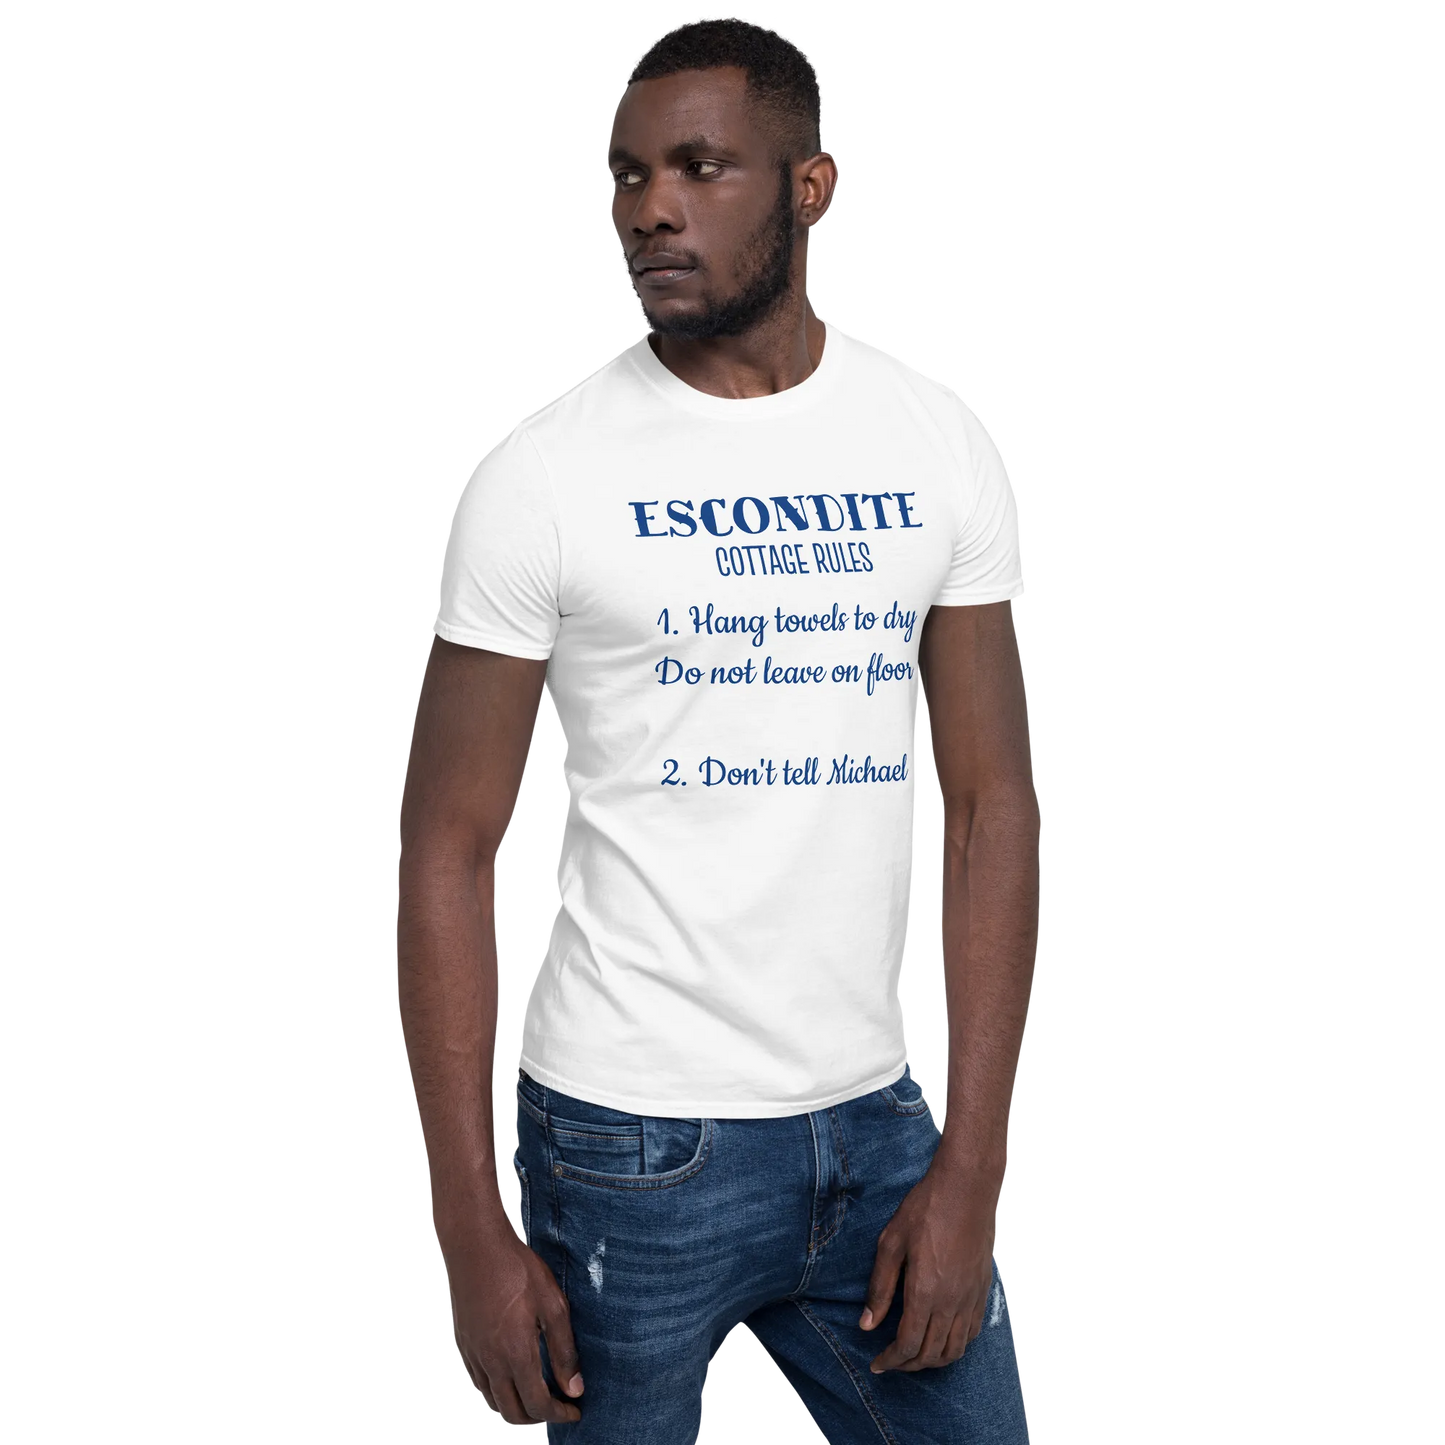 ESCONDITE Cottage Rules Tee in White on man front